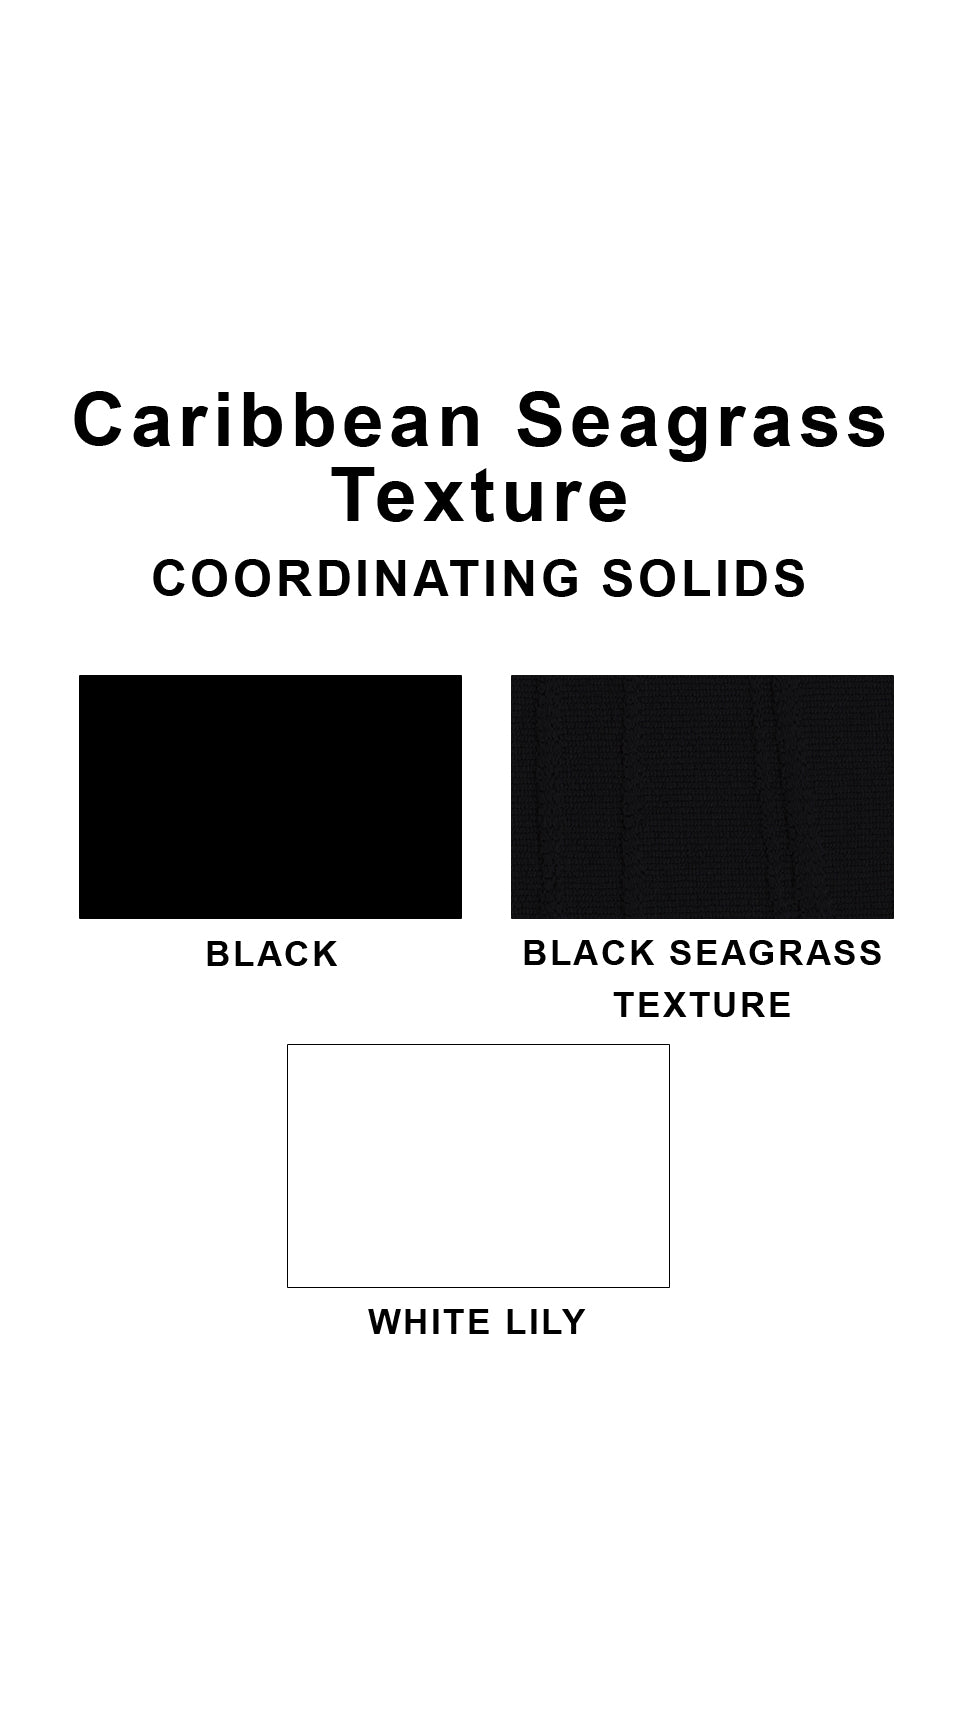 Coordinating solids chart for Caribbean Seagrass Texture swimsuit print: Black, Black Seagrass Texture and White Lily